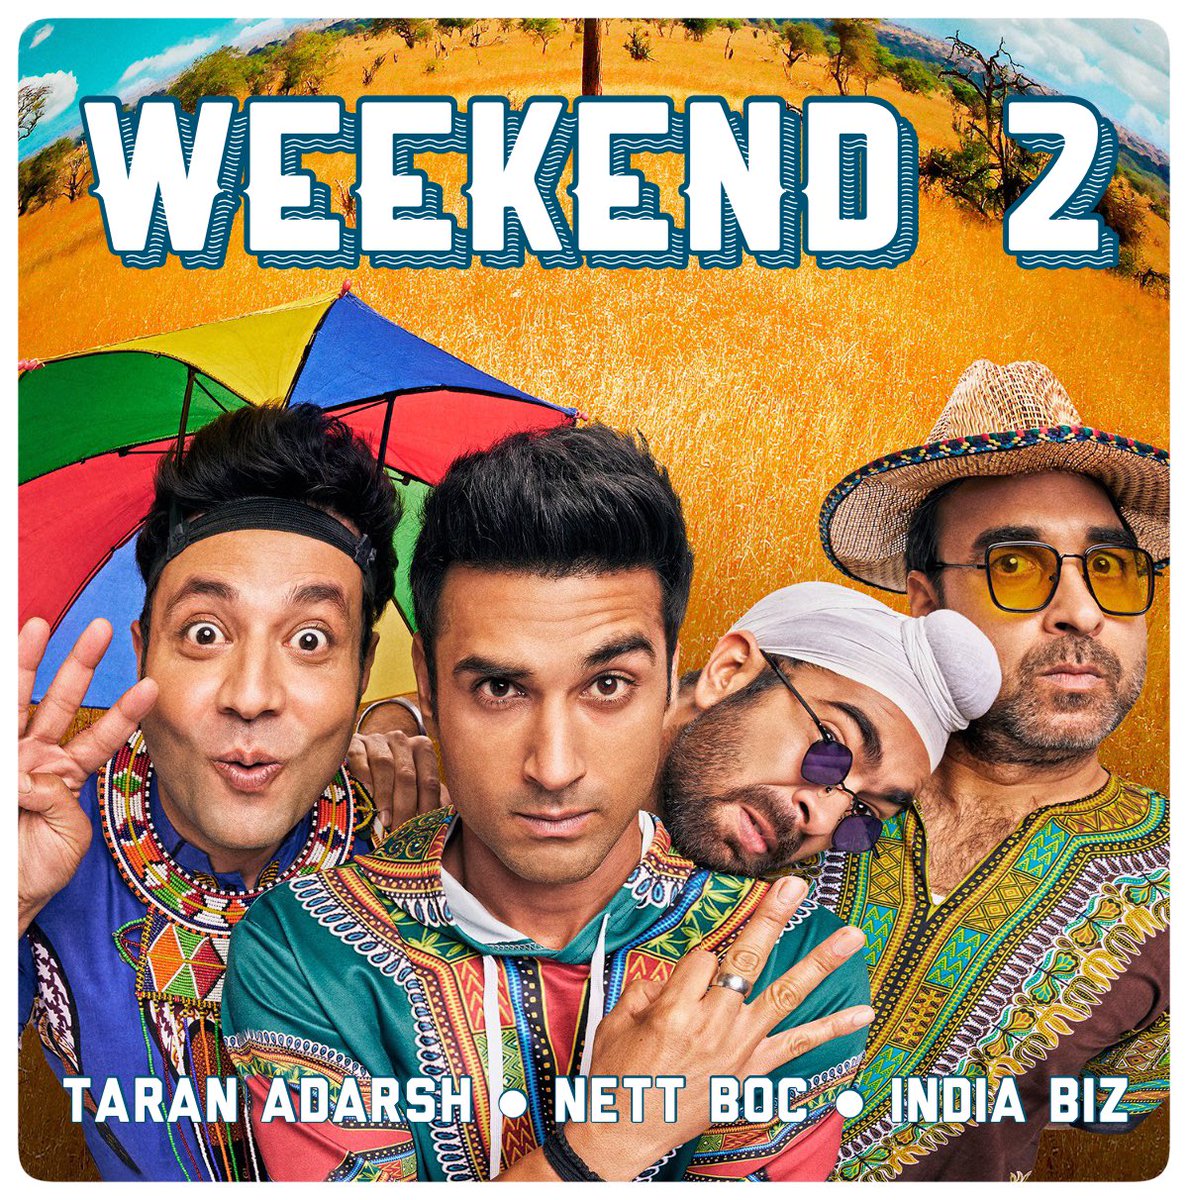 #Fukrey3 witnesses a spike in biz on [second] Sat and Sun, despite multiple new arrivals… Inches closer to ₹ 80 cr mark… [Week 2] Fri 2.31 cr, Sat 4.02 cr, Sun 4.11 cr. Total: ₹ 76.46 cr. #India biz. #Boxoffice